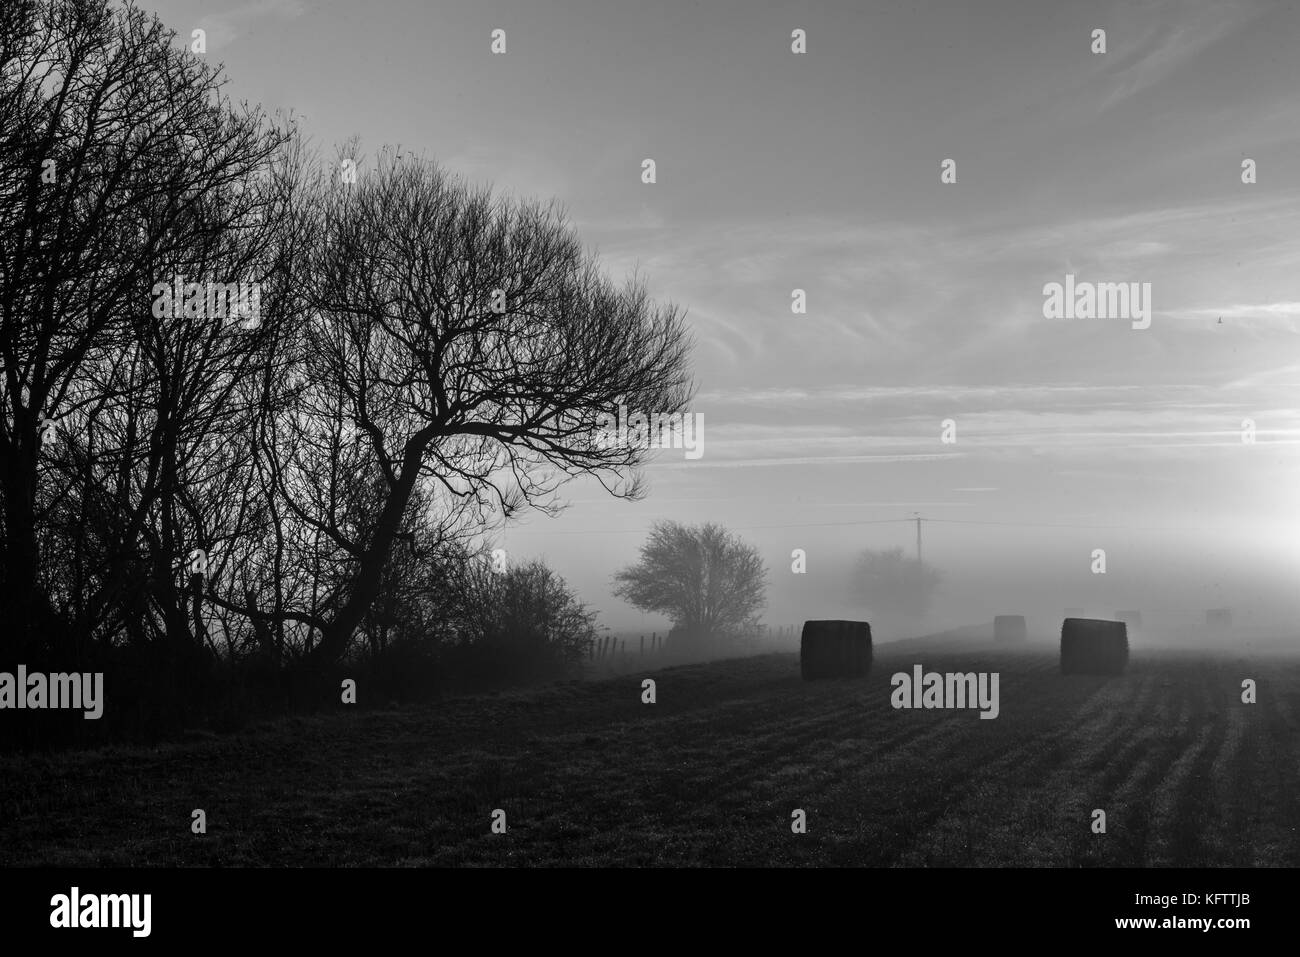 Misty evening in the English countryside with hay bales Stock Photo